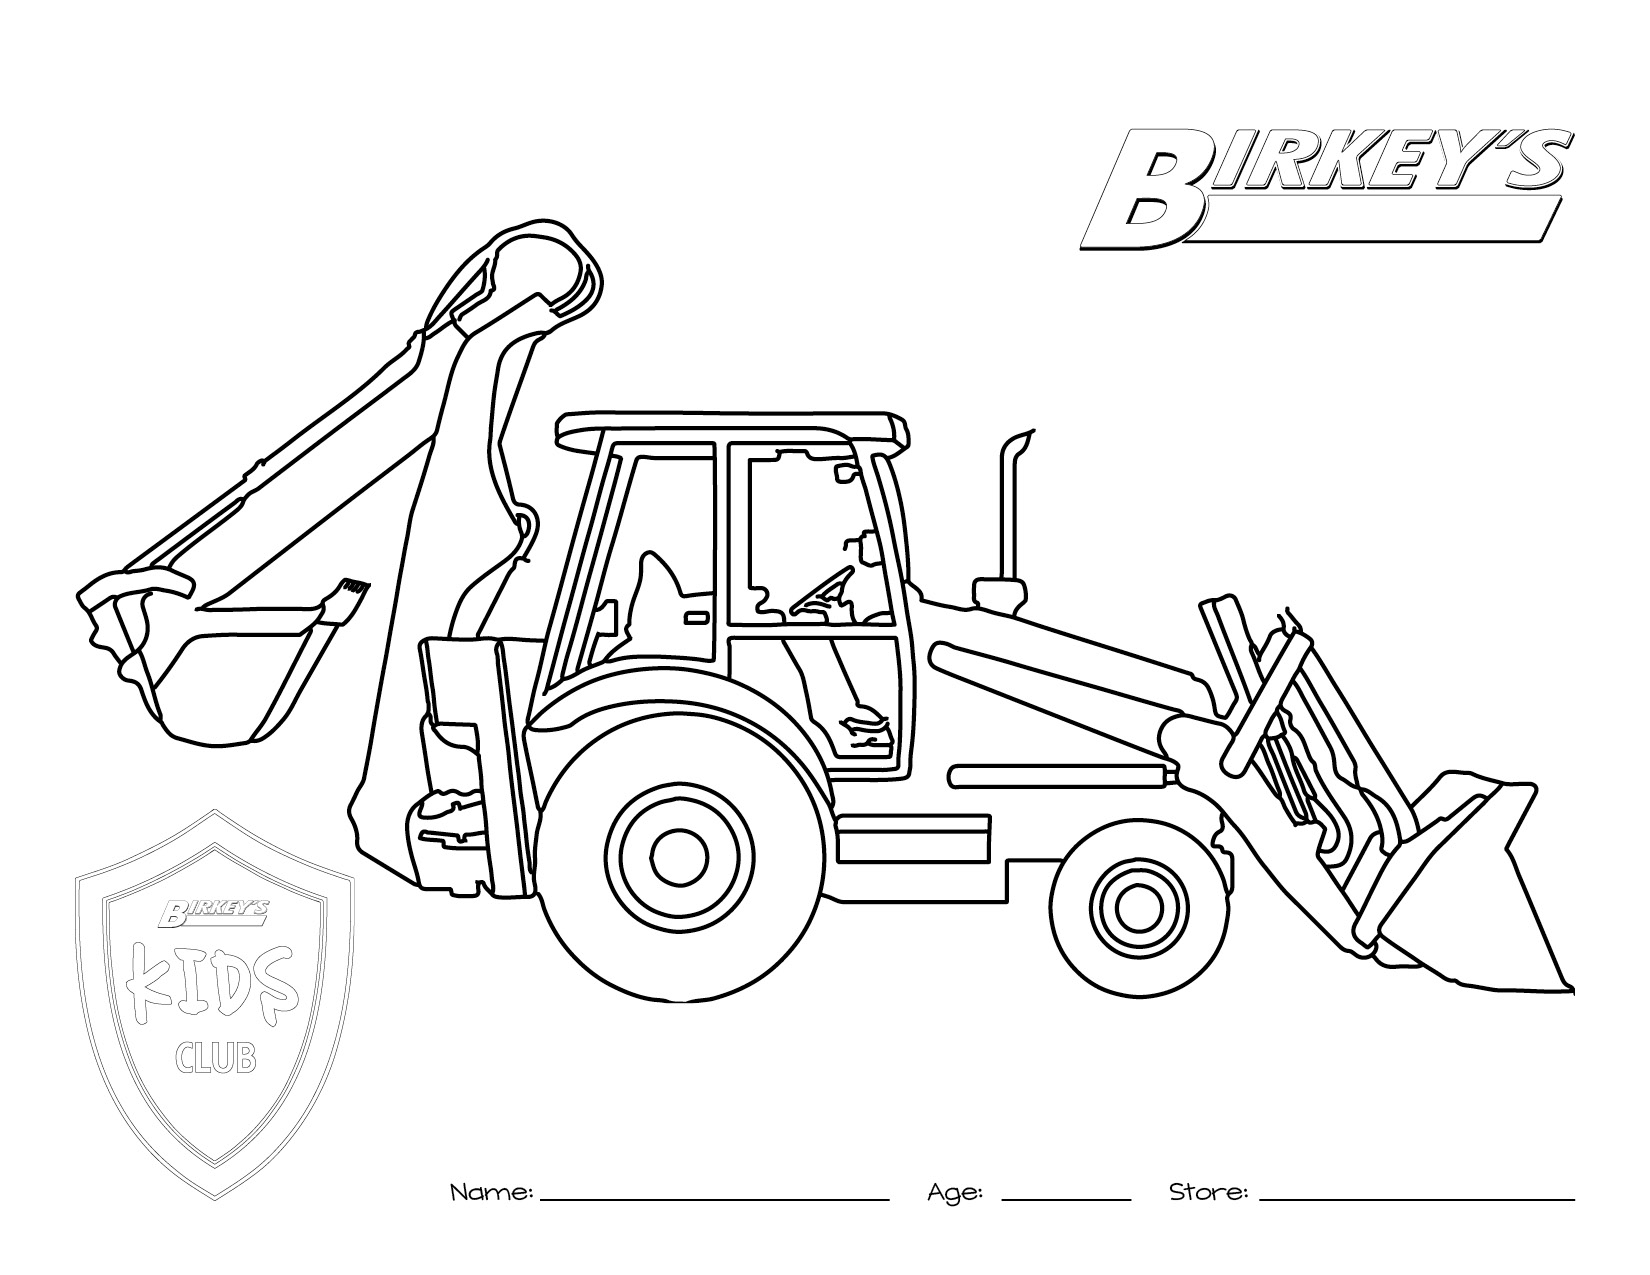 Backhoe Coloring Page at GetColorings.com | Free printable colorings